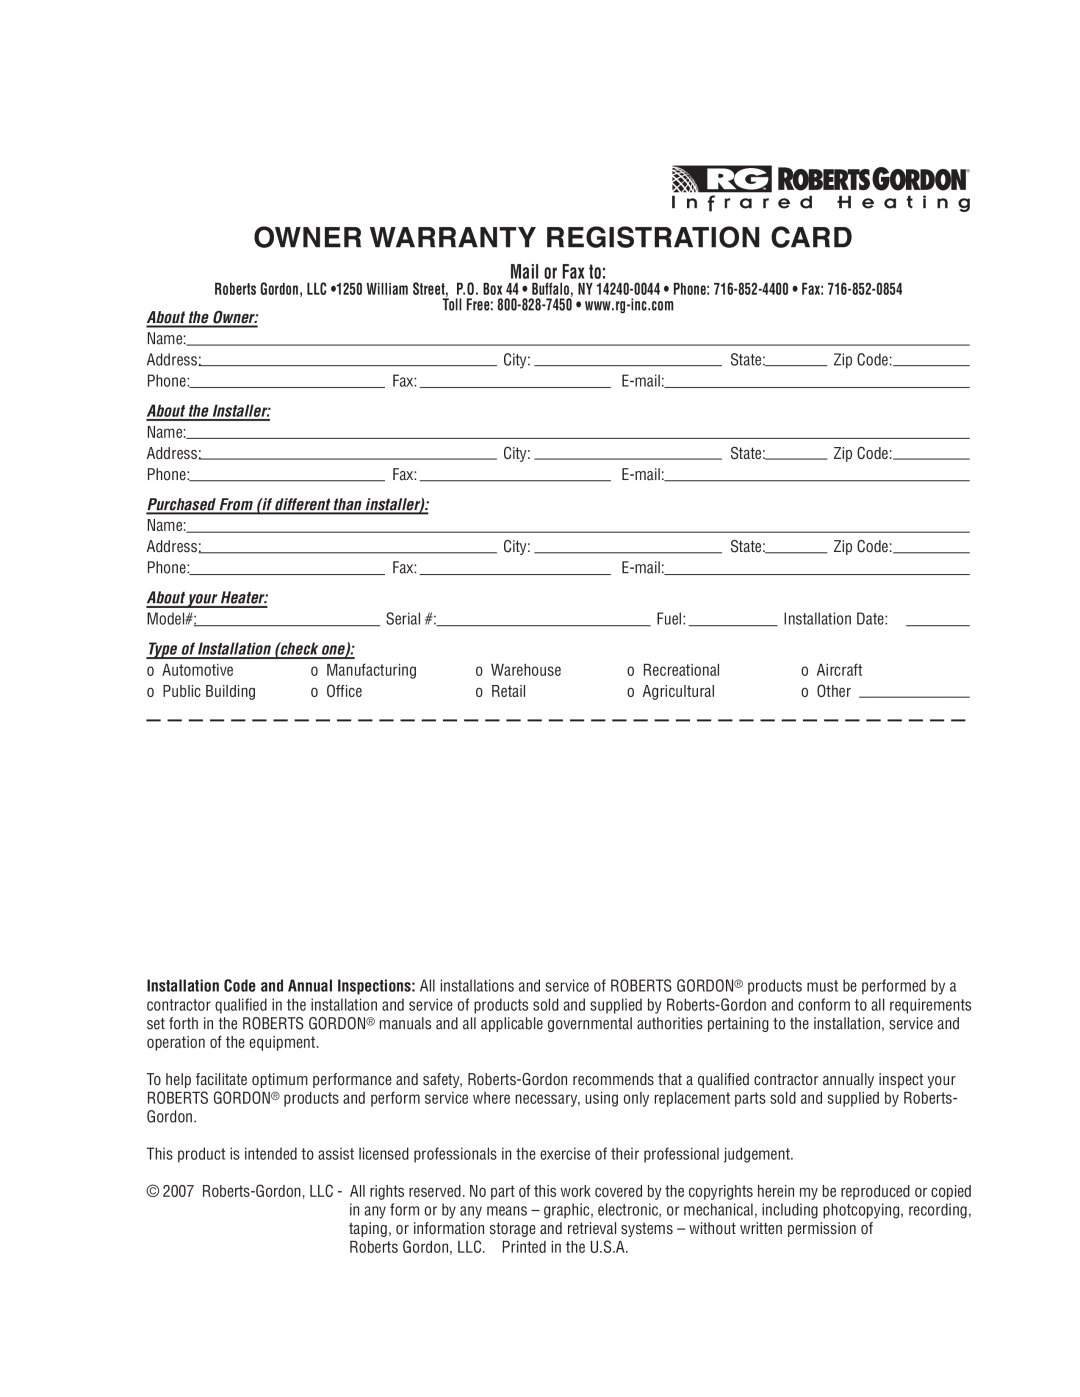 Roberts Gorden CGTH-40, CGTH-30 Owner Warranty Registration Card, About the Owner, About the Installer, About your Heater 